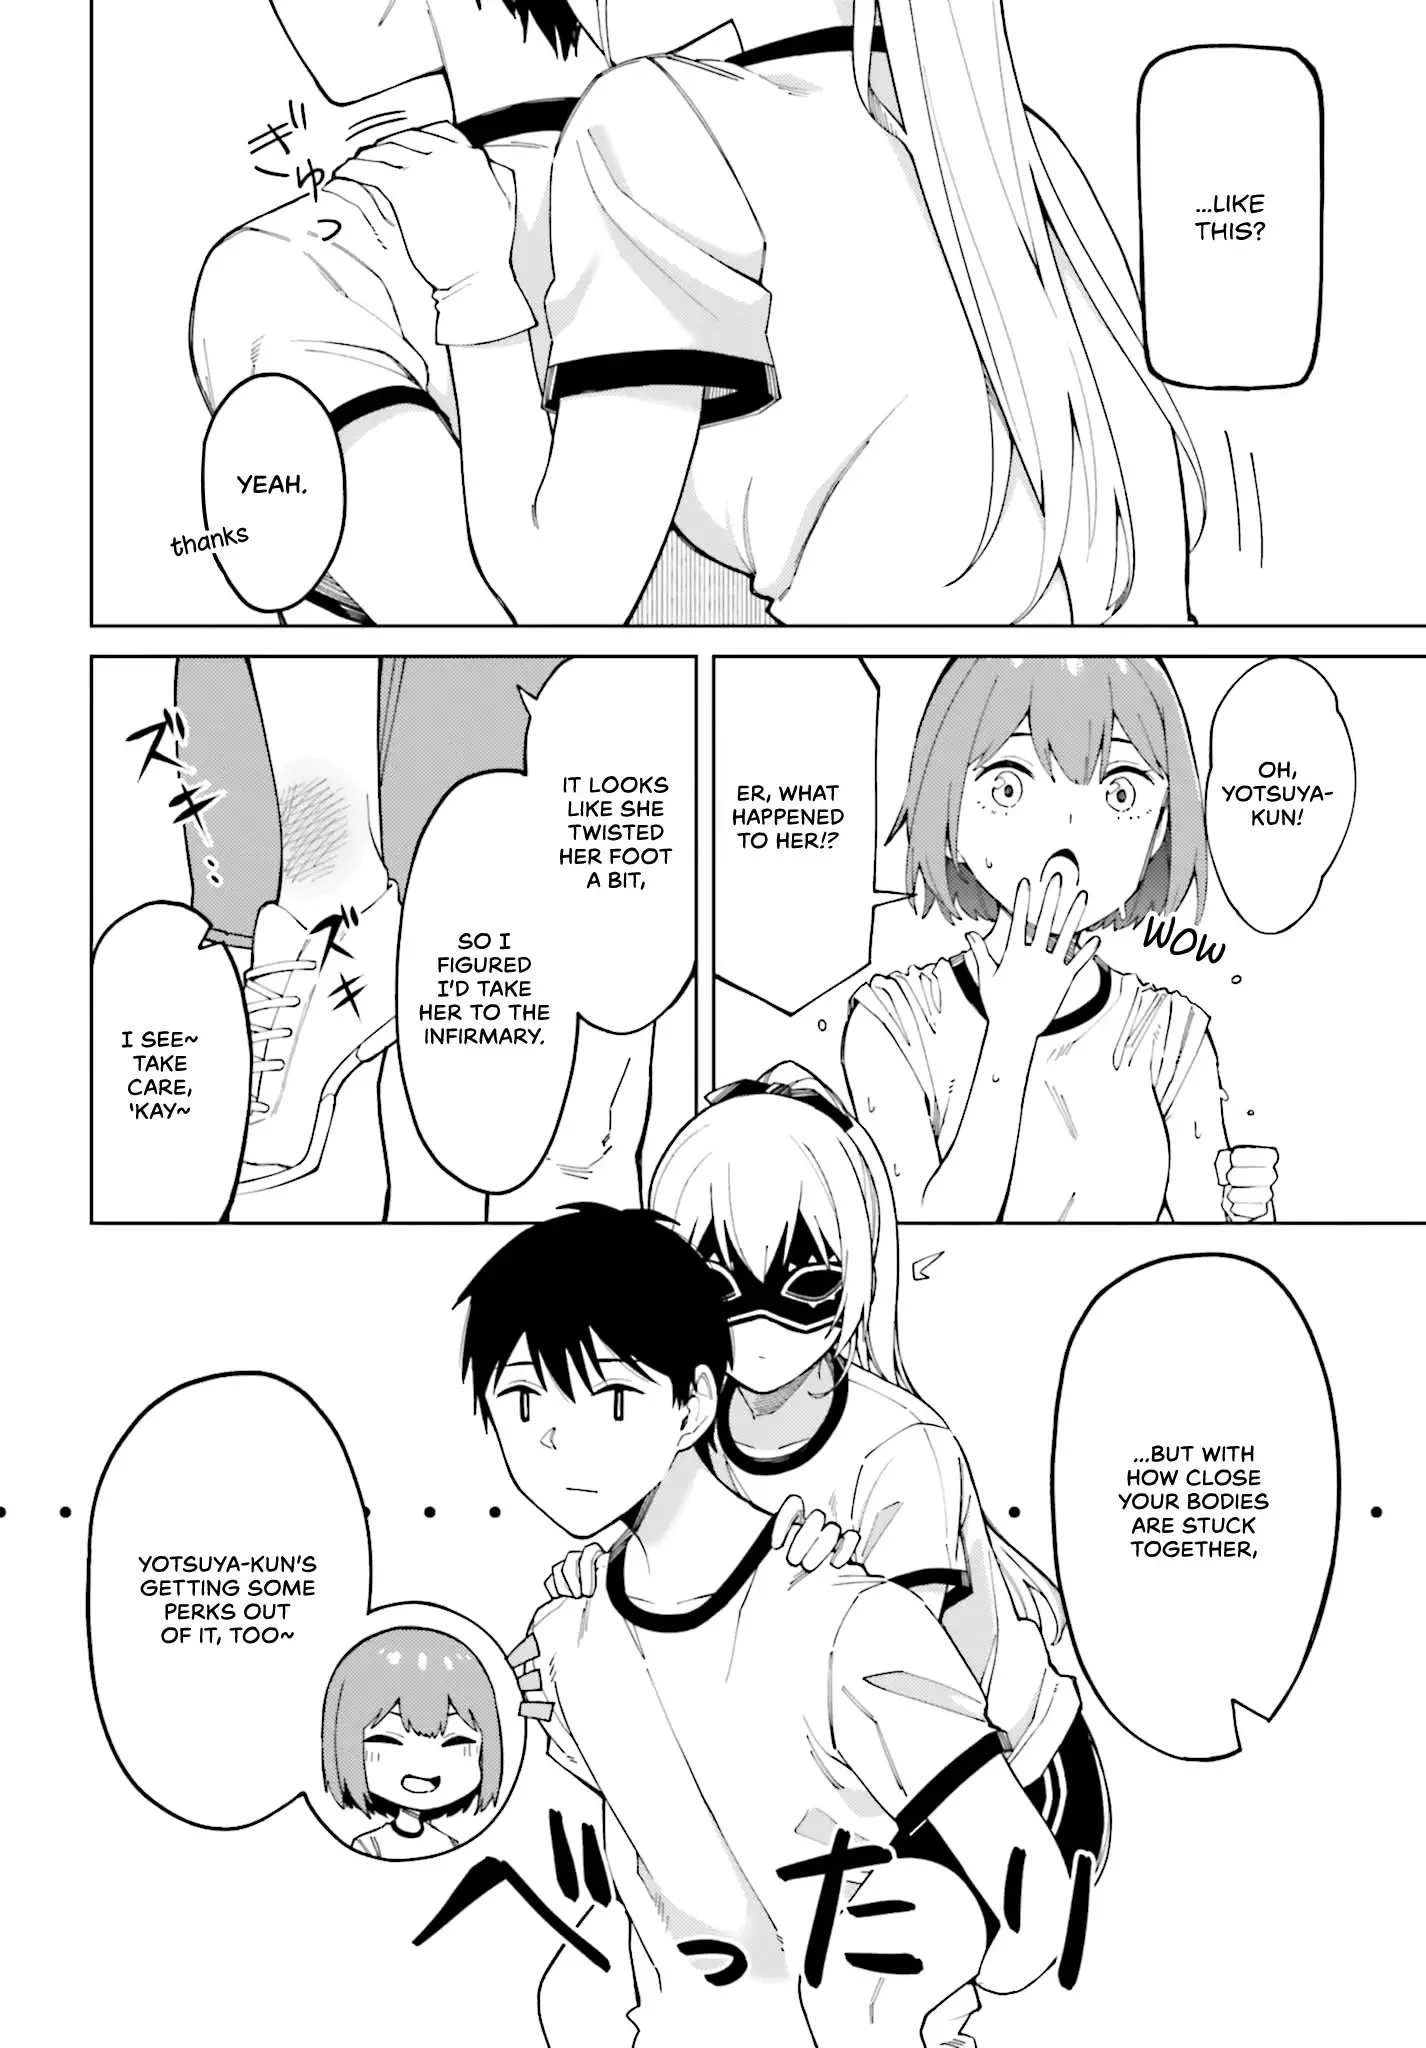 I Don't Understand Shirogane-San's Facial Expression At All - 2 page 14